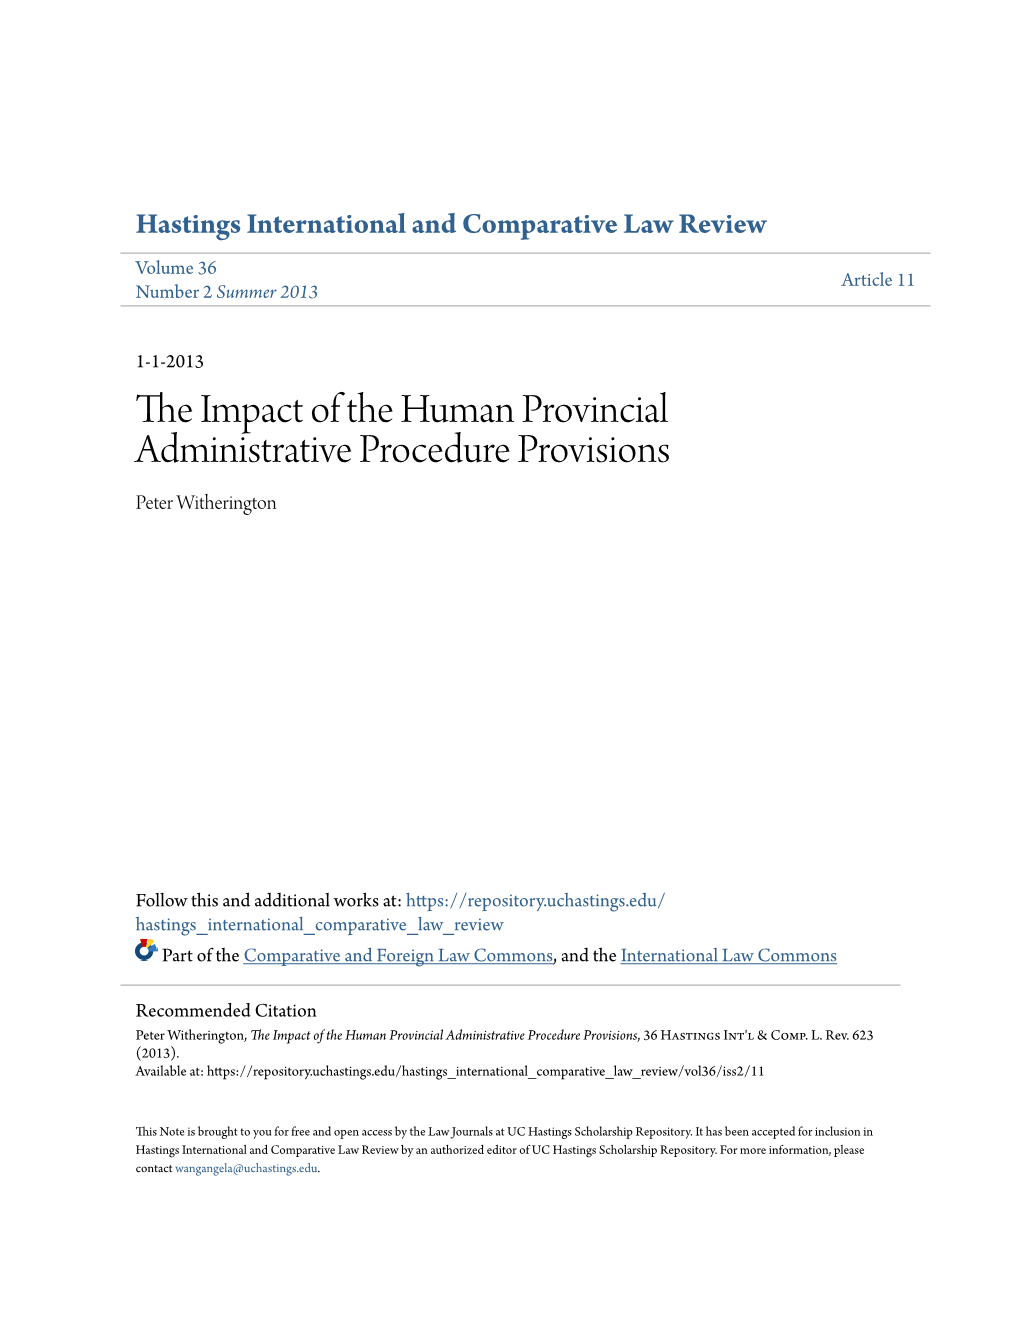 The Impact of the Human Provincial Administrative Procedure Provisions, 36 Hastings Int'l & Comp